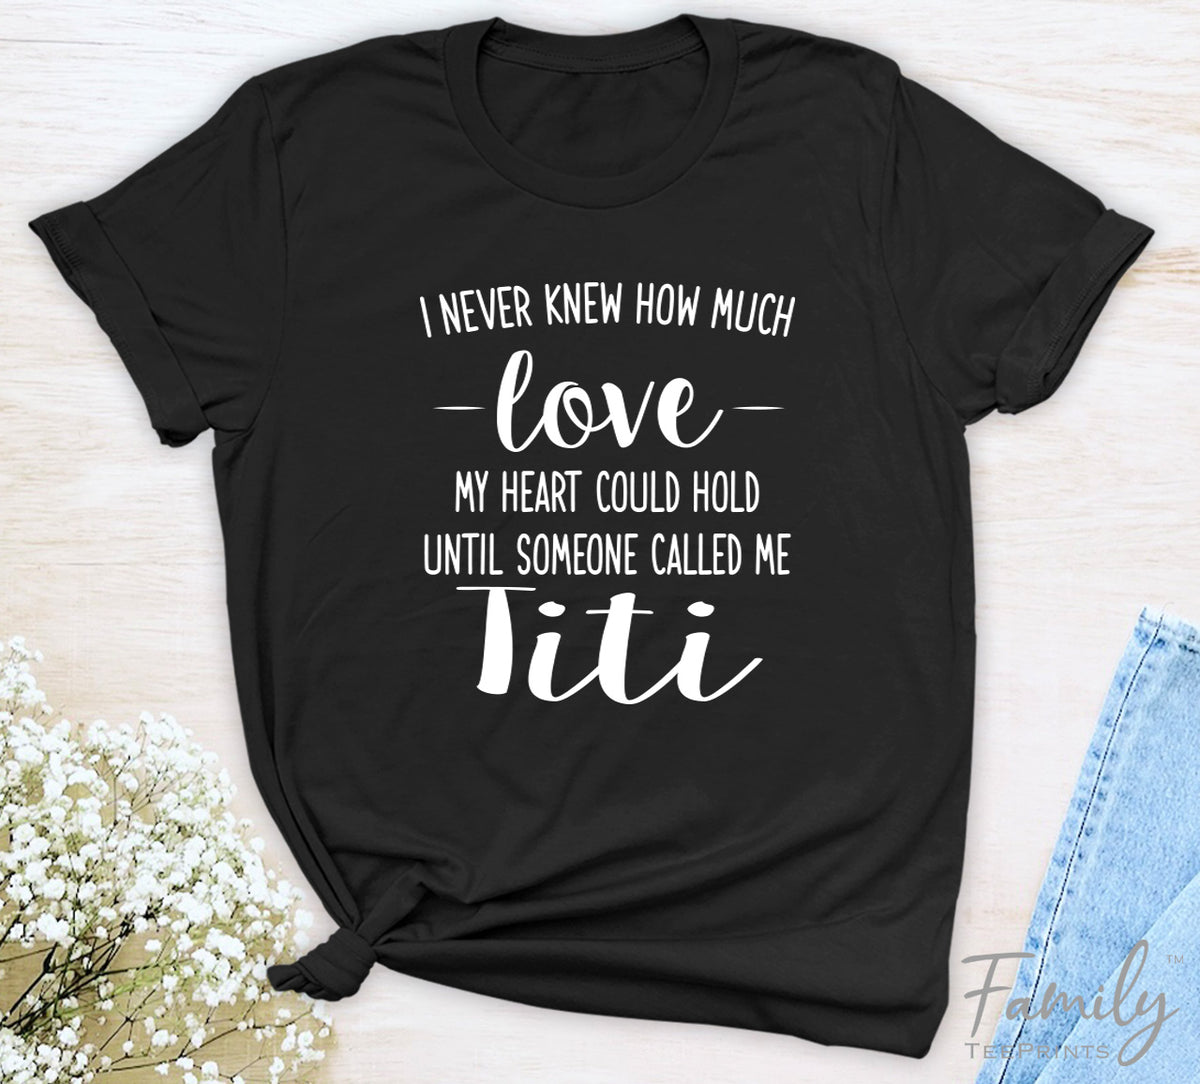 I Never Knew How Much Love...Titi - Unisex T-shirt - Titi Shirt - Gift For Titi